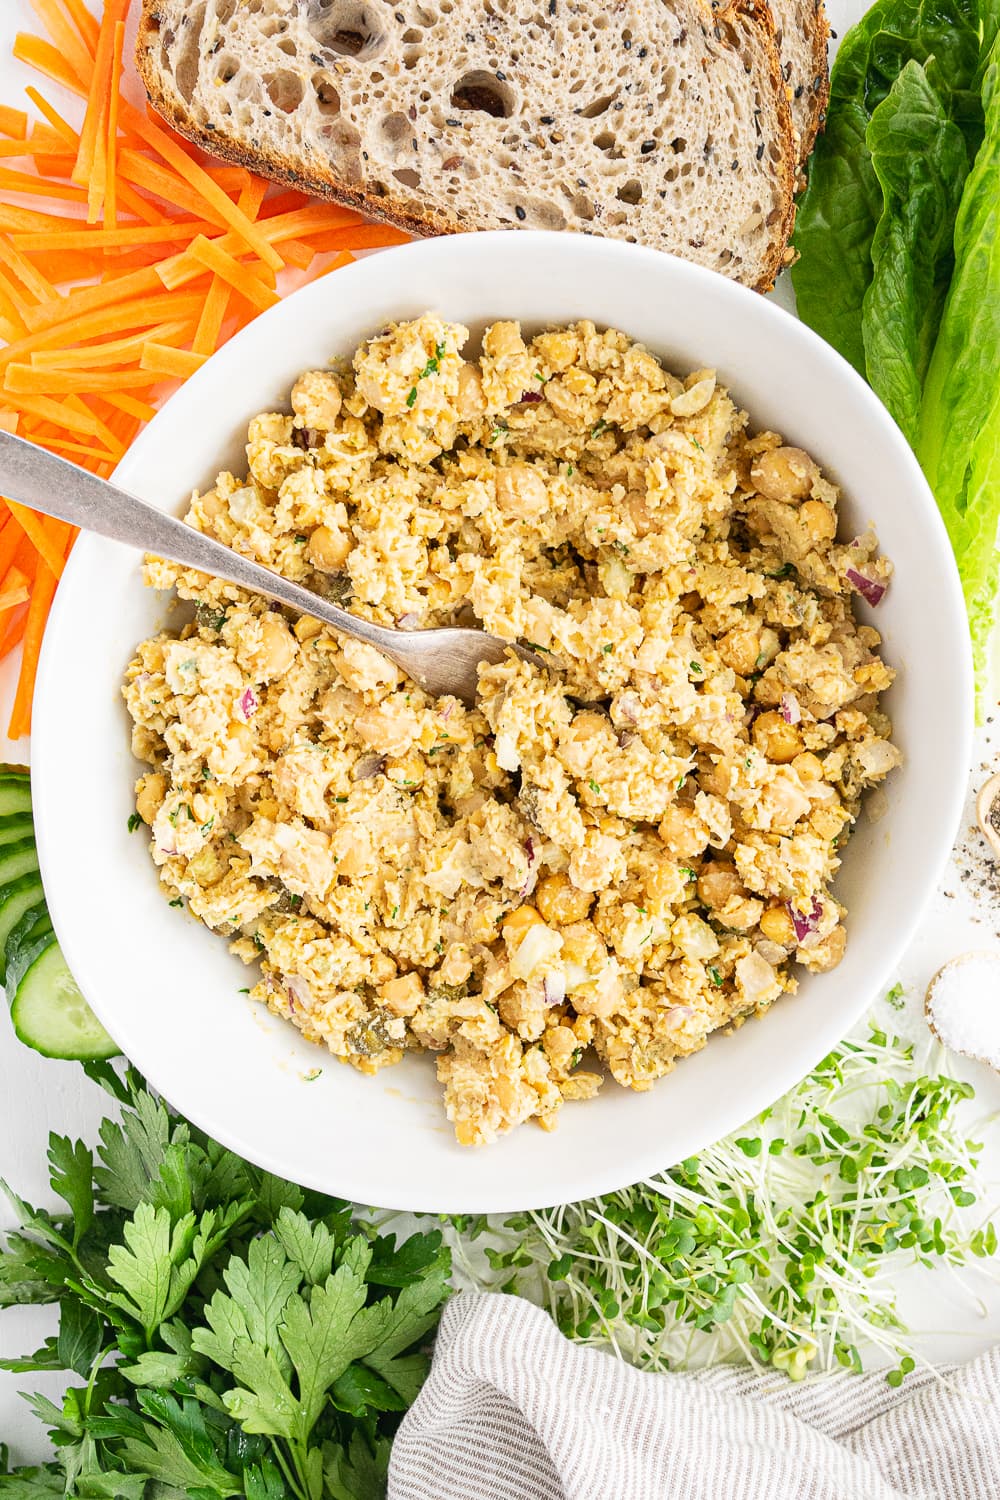 Bowl with chickpea salad